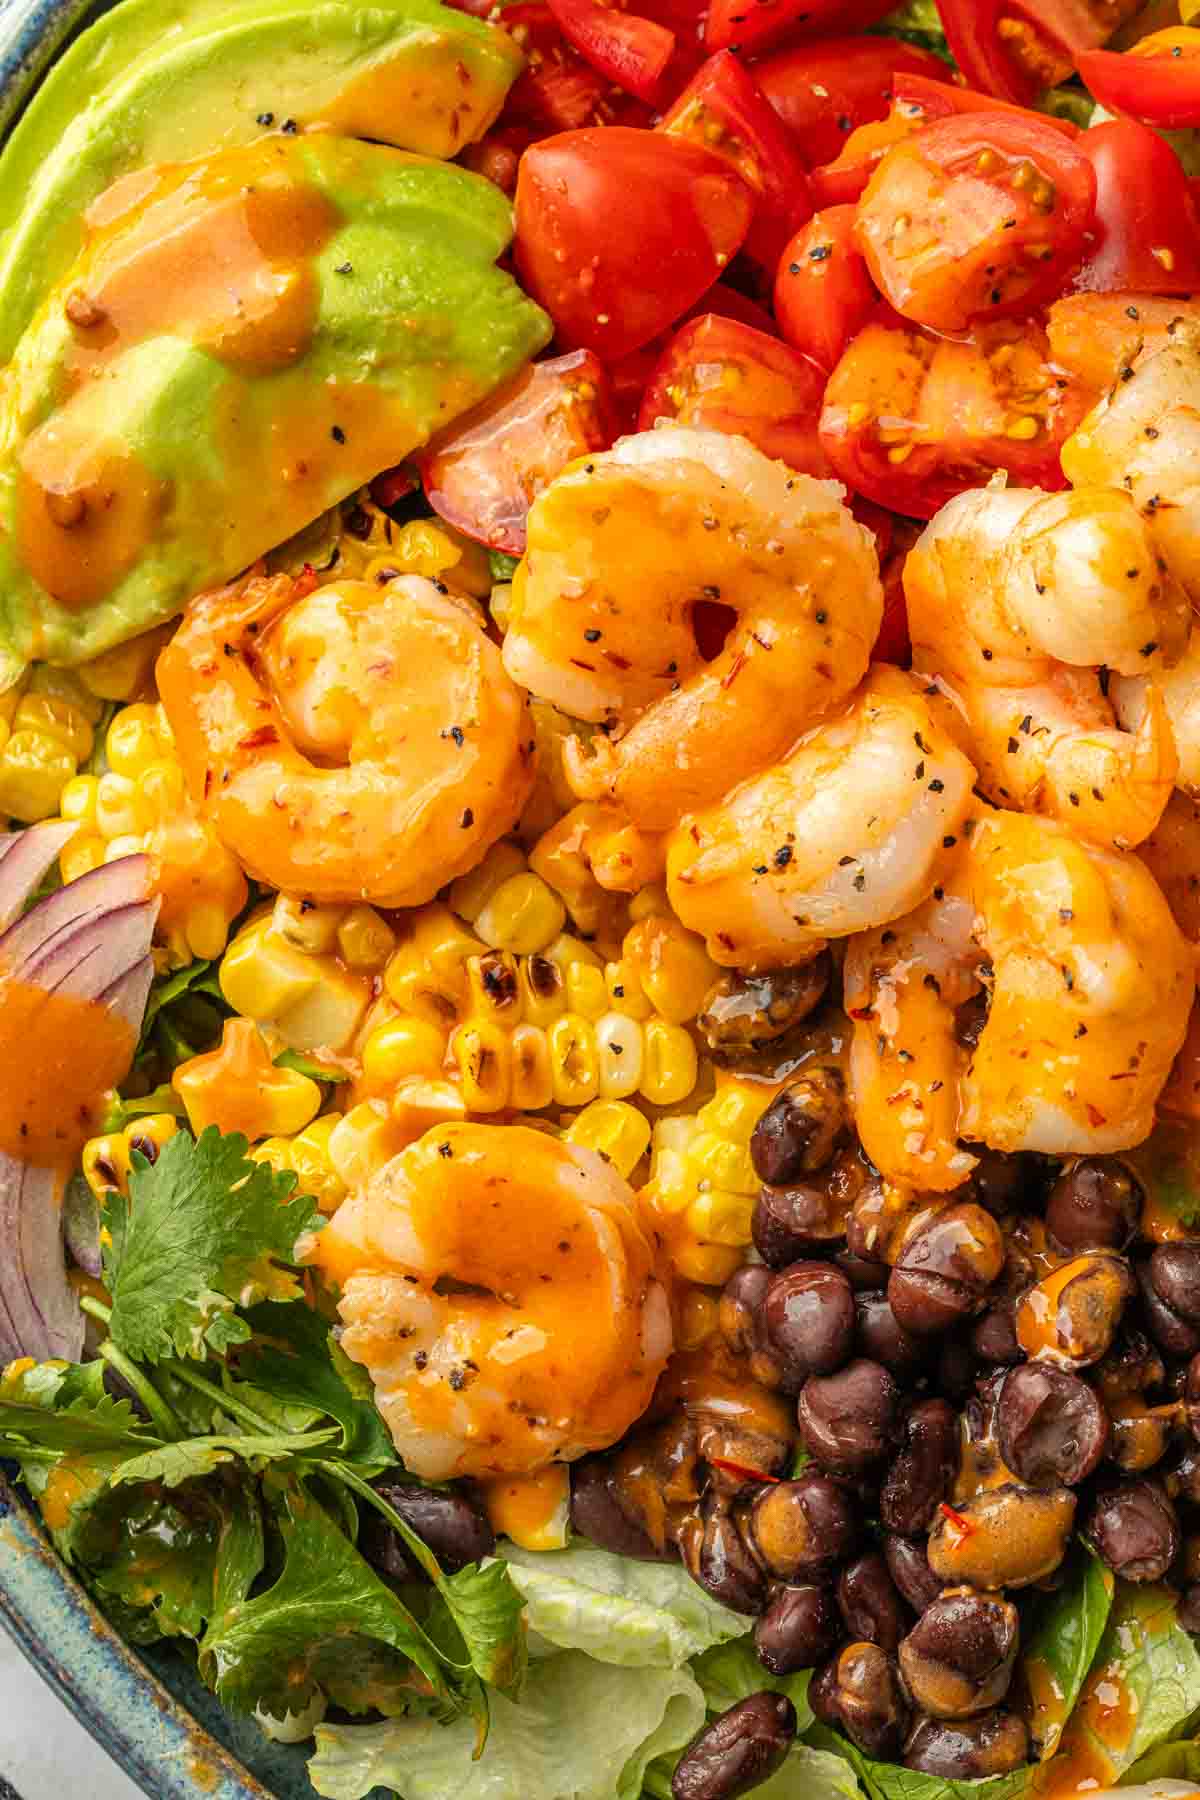 Avocado, tomatoes, pan seared shrimp, roasted corn and black beans on top of a bowl of salad lettuce drizzled with a honey chipotle dressing. 